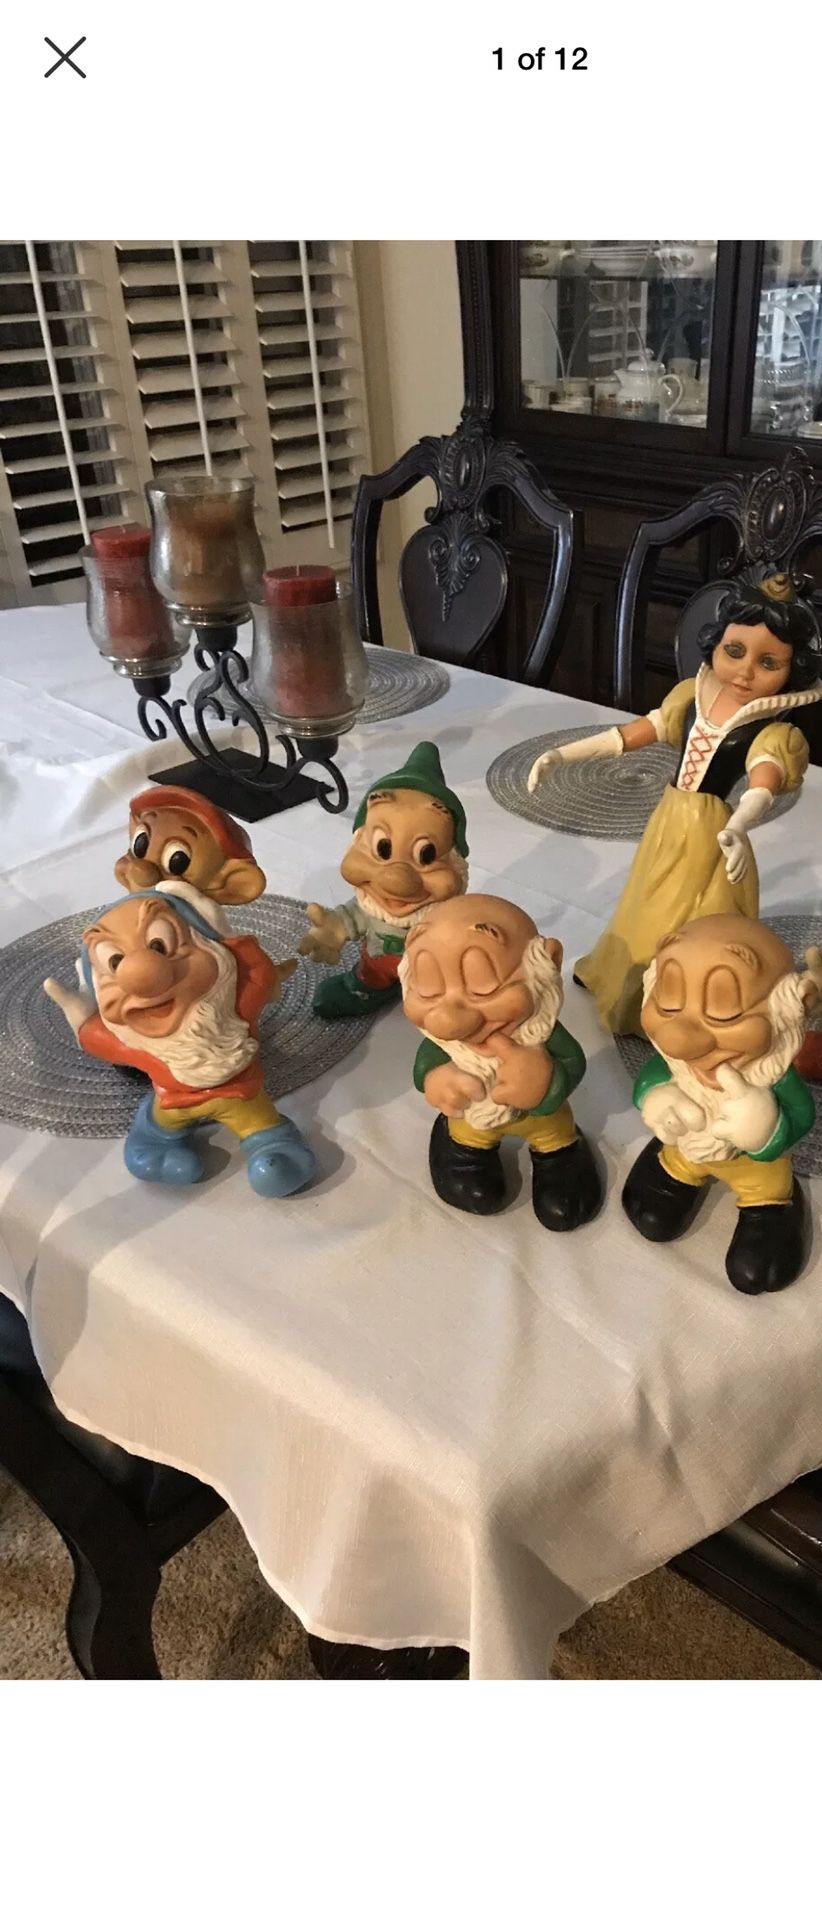 Snow White And The Seven Dwarfs Figurines By Walt Disney Production 1960's Large